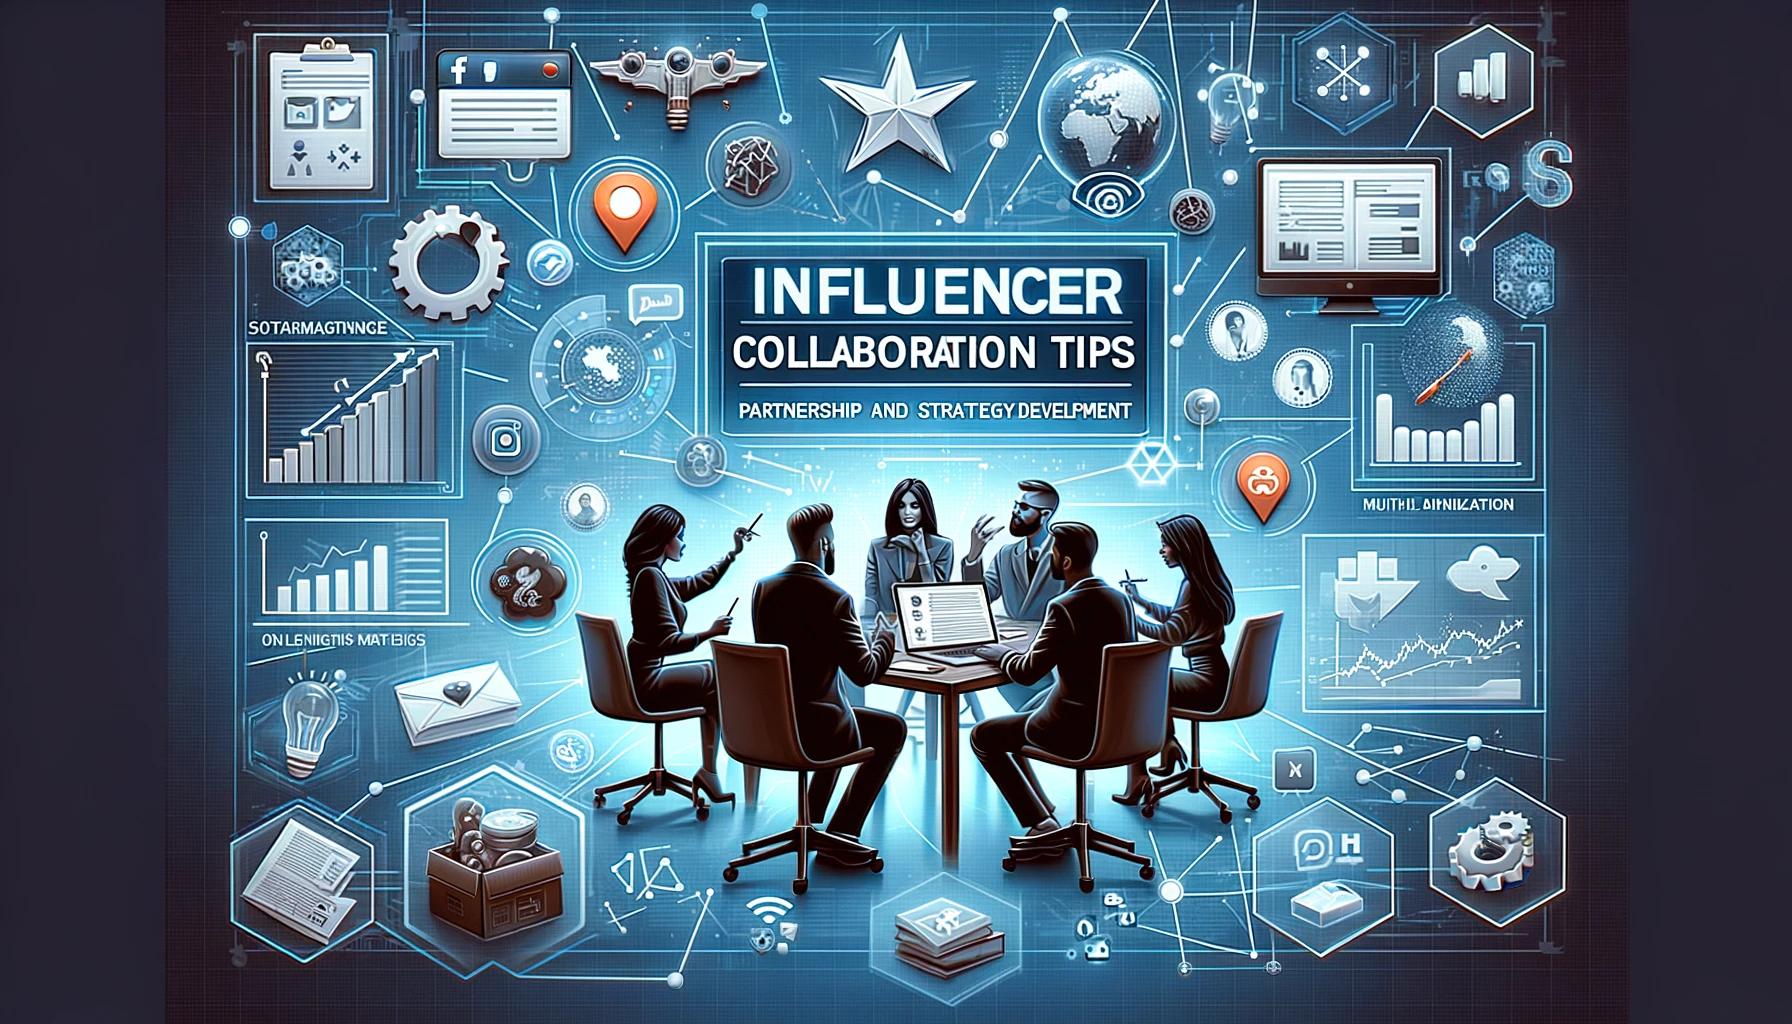 Scene showing influencers and brands engaging in strategy planning, surrounded by social media icons and analytics, representing Influencer Collaboration Tips.